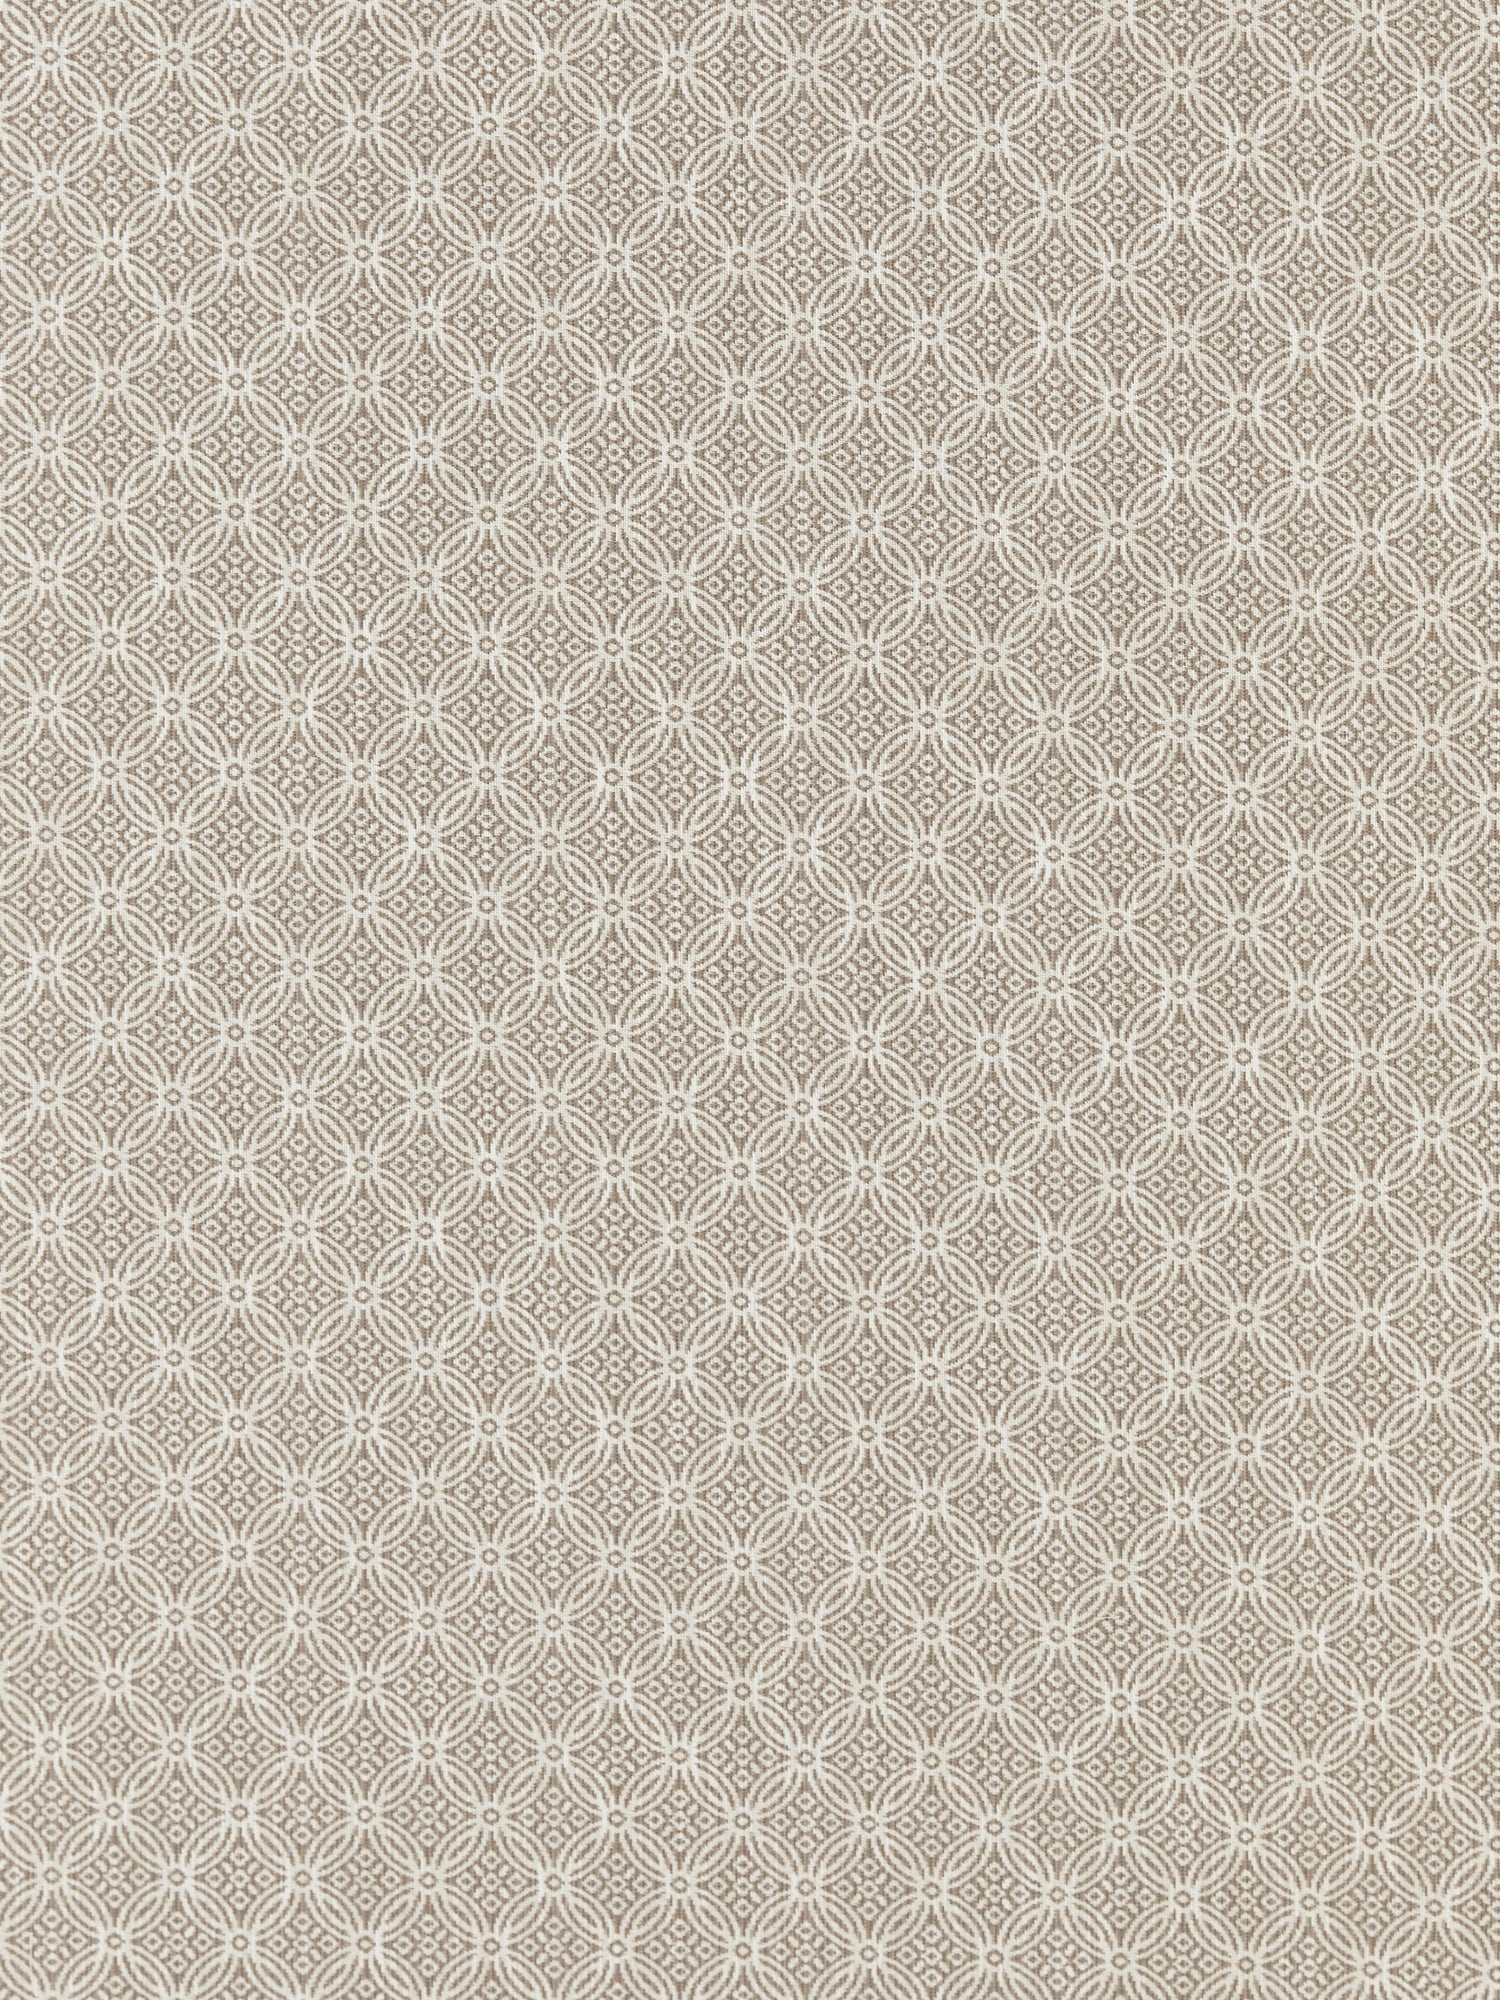 Cape May fabric in sandbar color - pattern number SC 000127317 - by Scalamandre in the Scalamandre Fabrics Book 1 collection